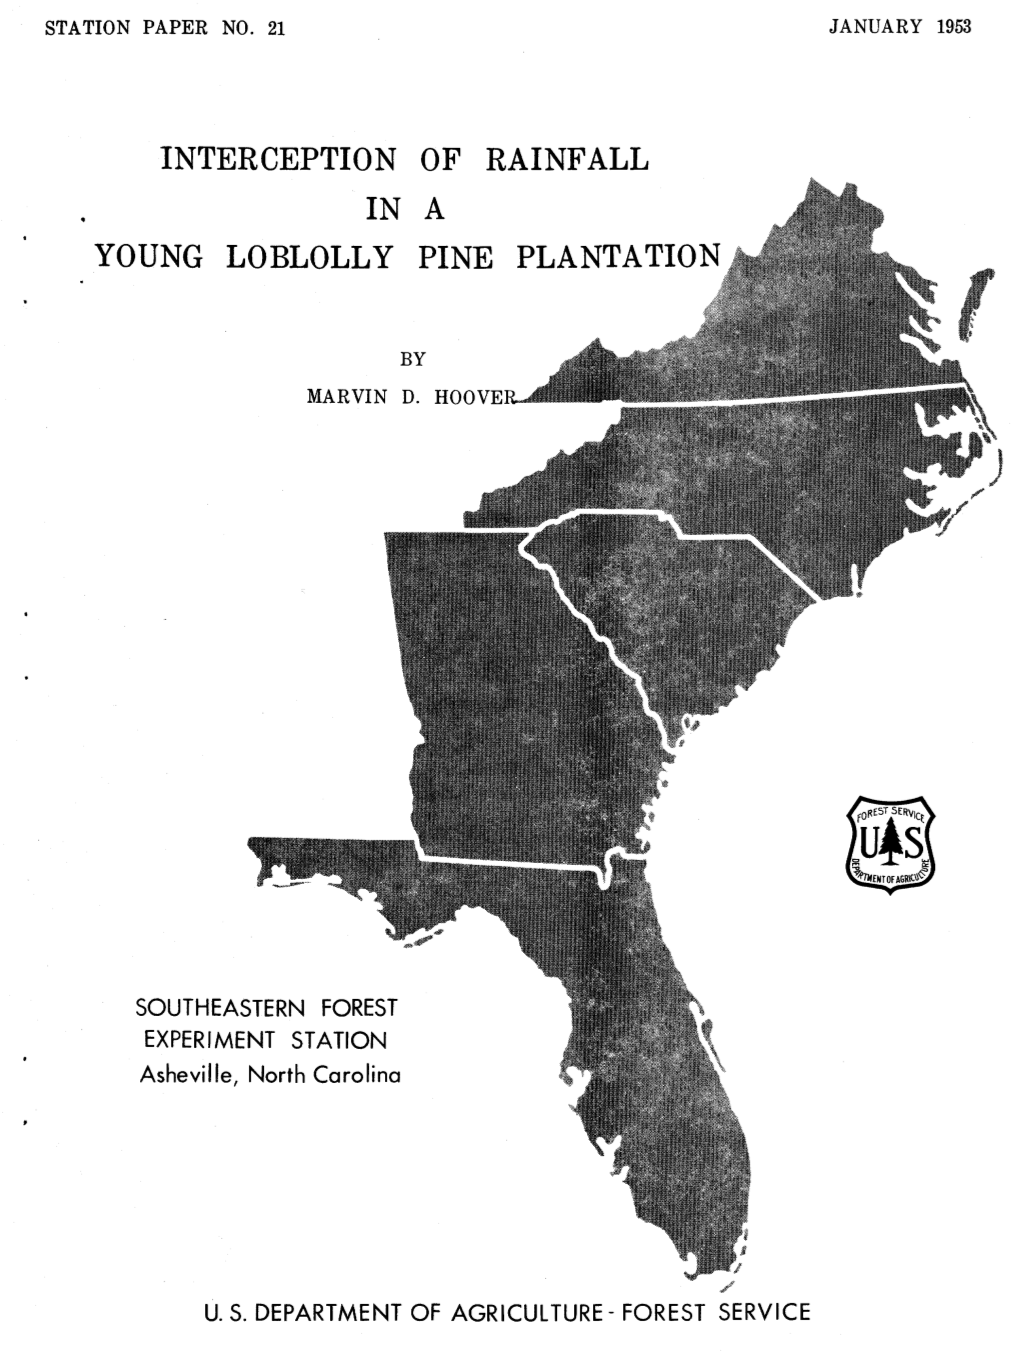 Interception of Rainfall in a Young Loblolly Pine Plantation